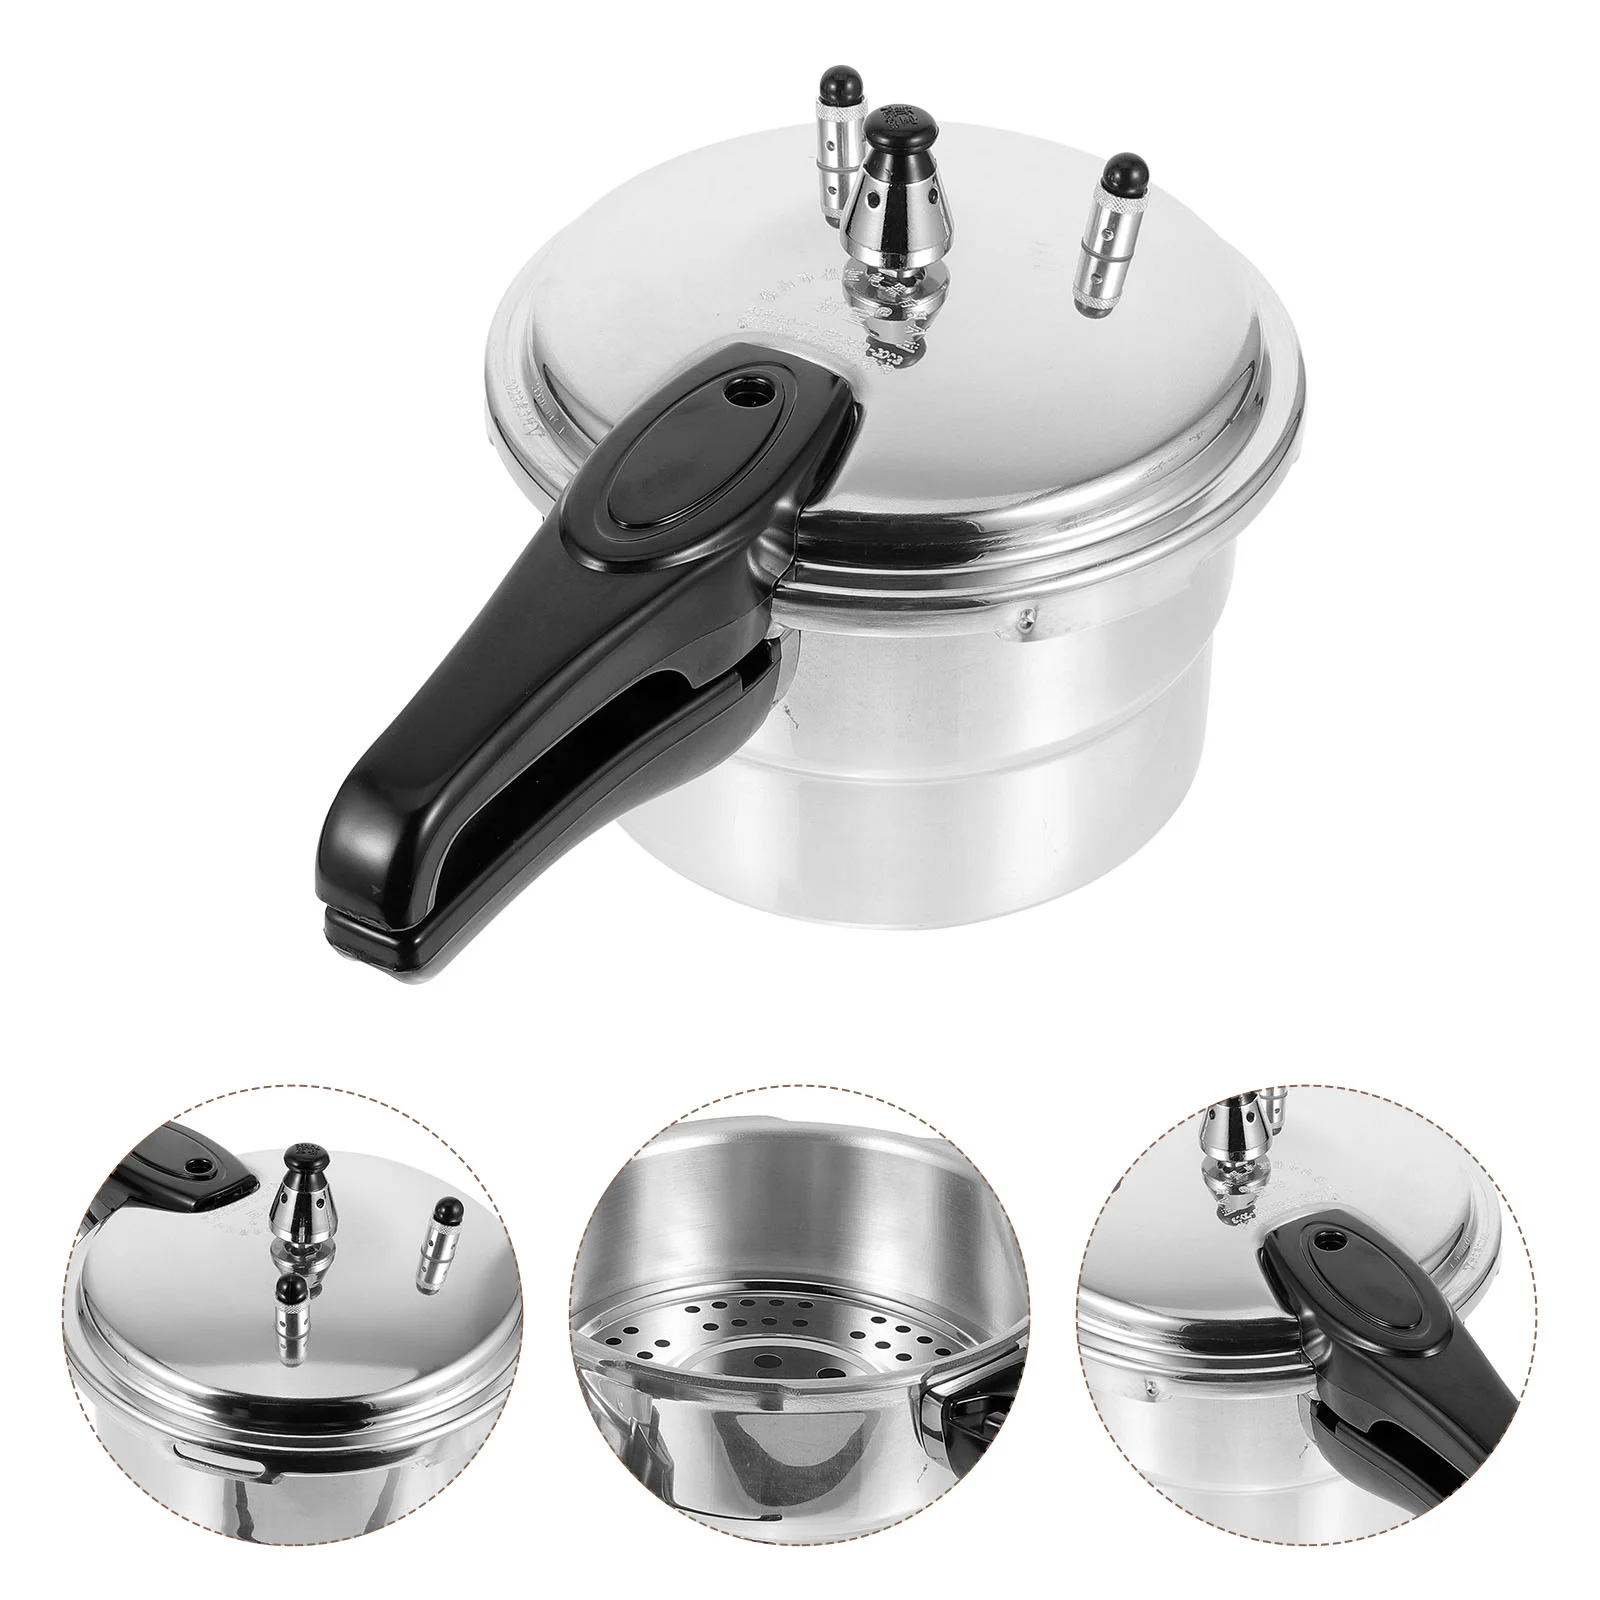 

Stainless Steel Pressure Cooker Canning Gas Stove Safe Induction Cookers Tall Pot Cooking Kitchen